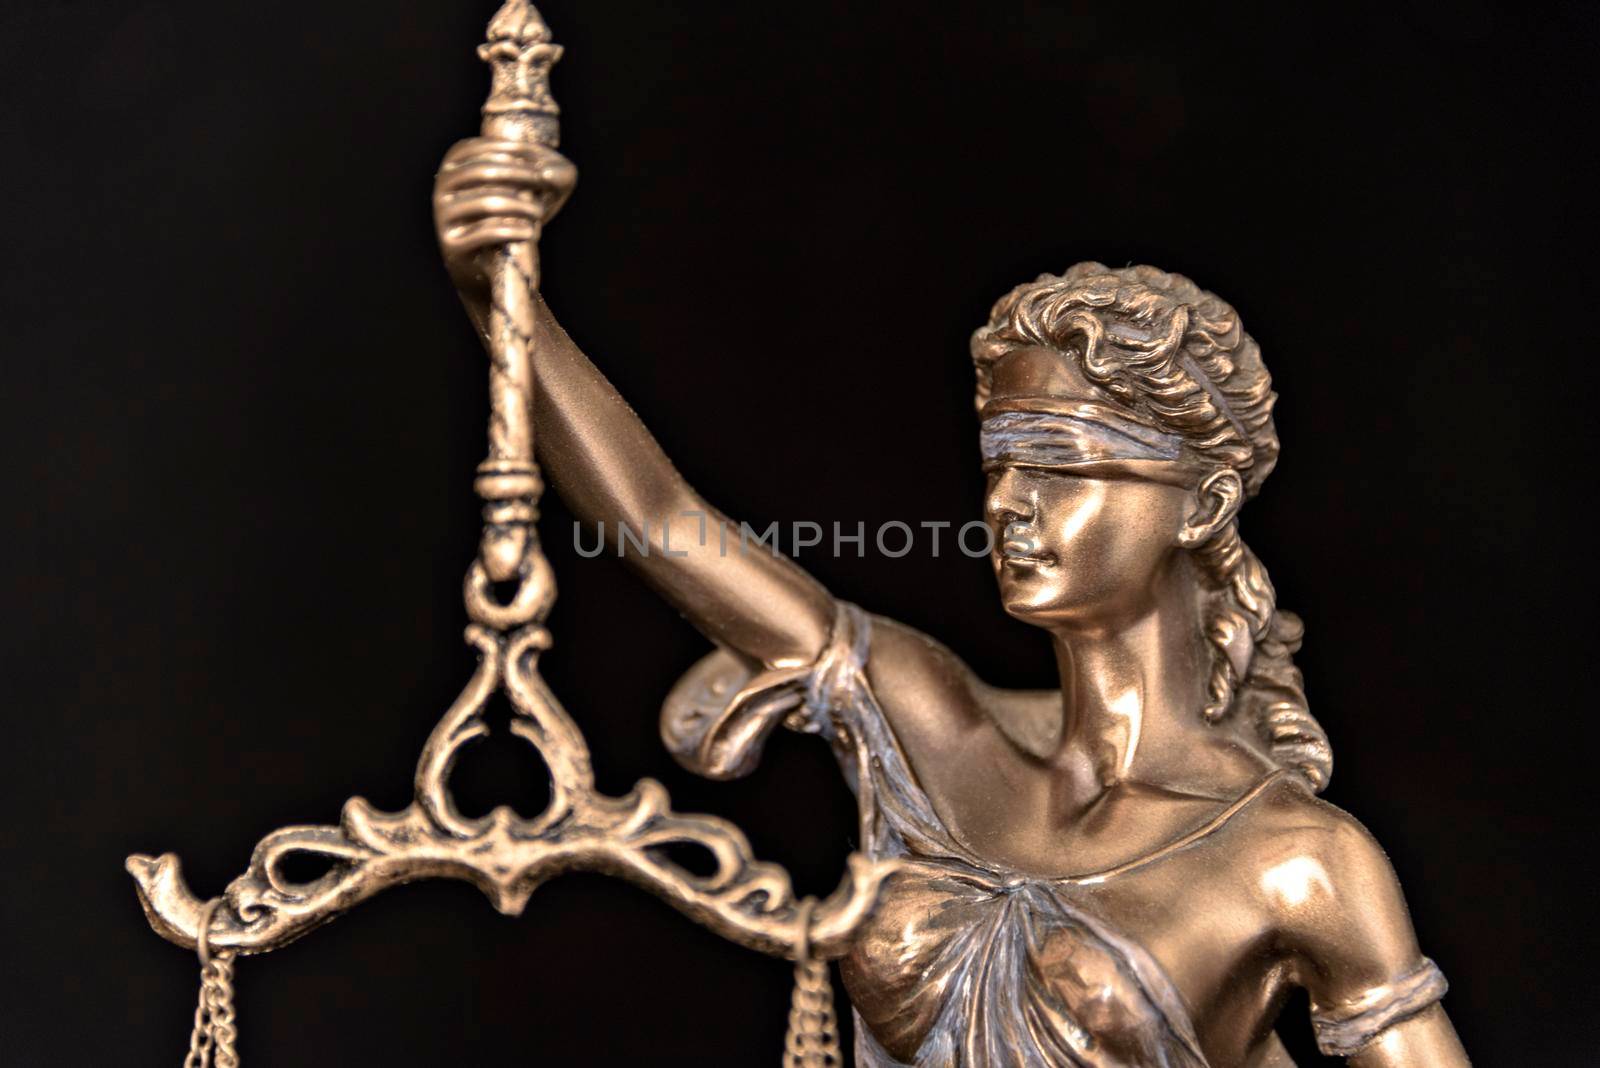 The Statue of Justice. Lady justice or Iustitia. by jbruiz78